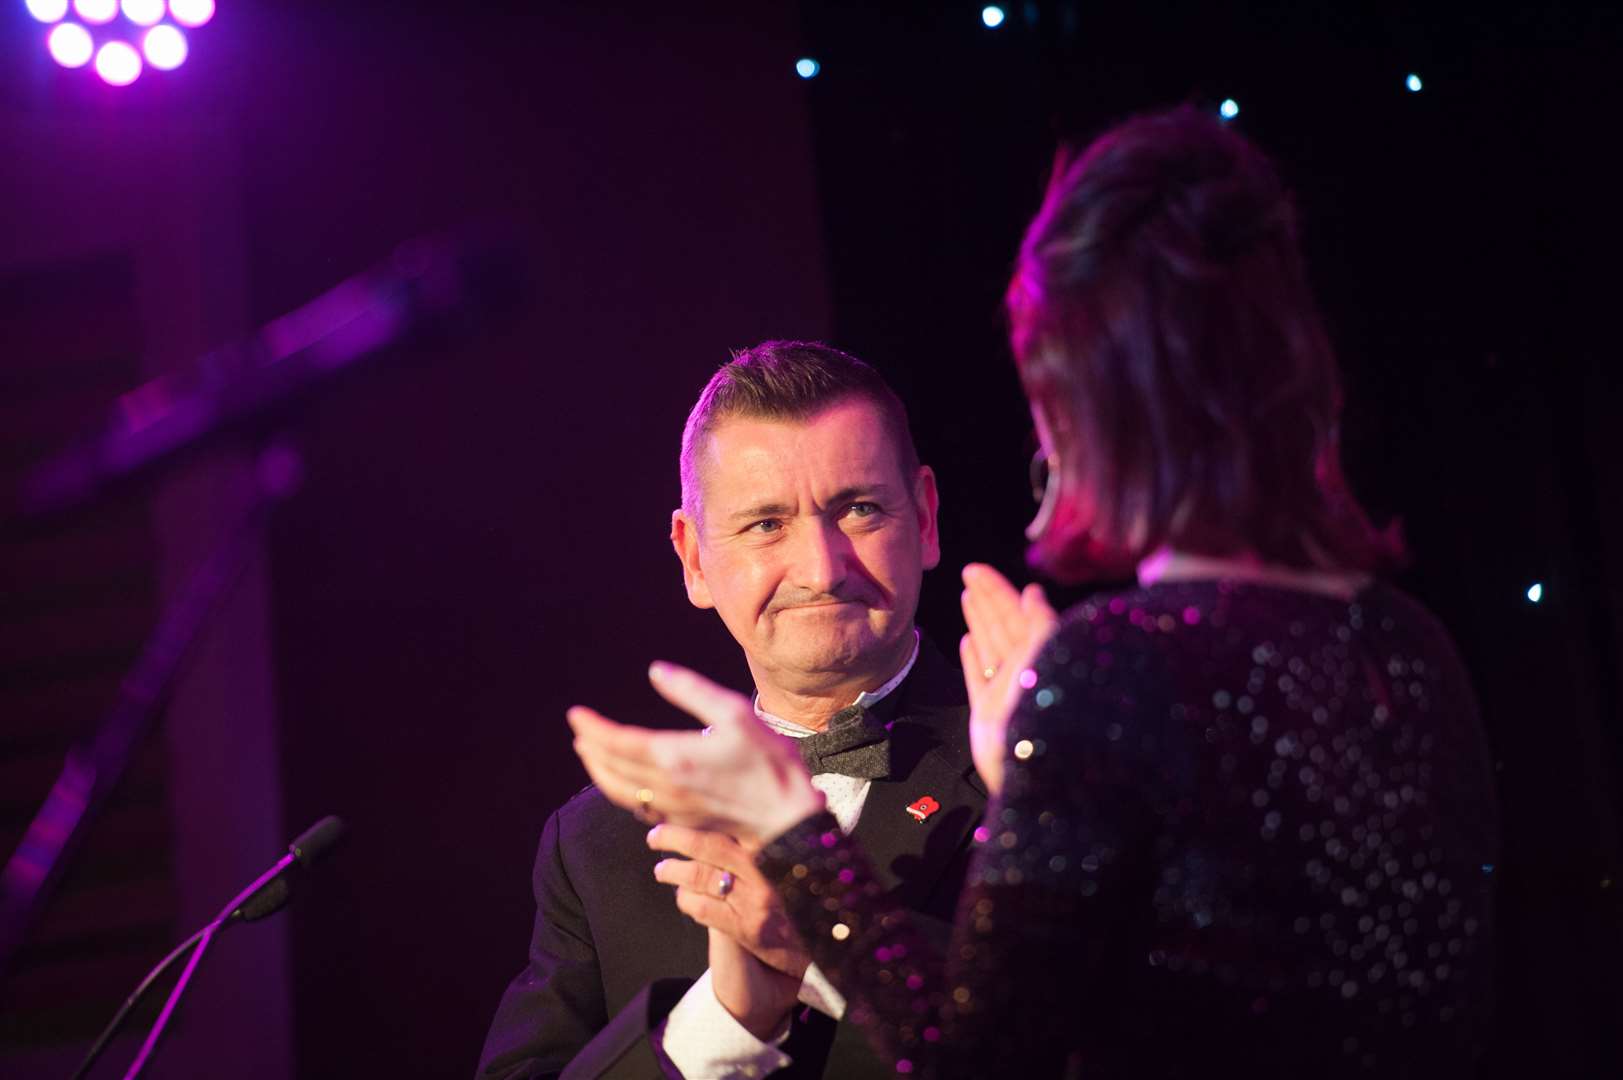 Graeme Bell of title sponsor Inverness Airport speaks to host Nicky Marr on stage at last year's Highland Heroes awards. Picture: Callum Mackay